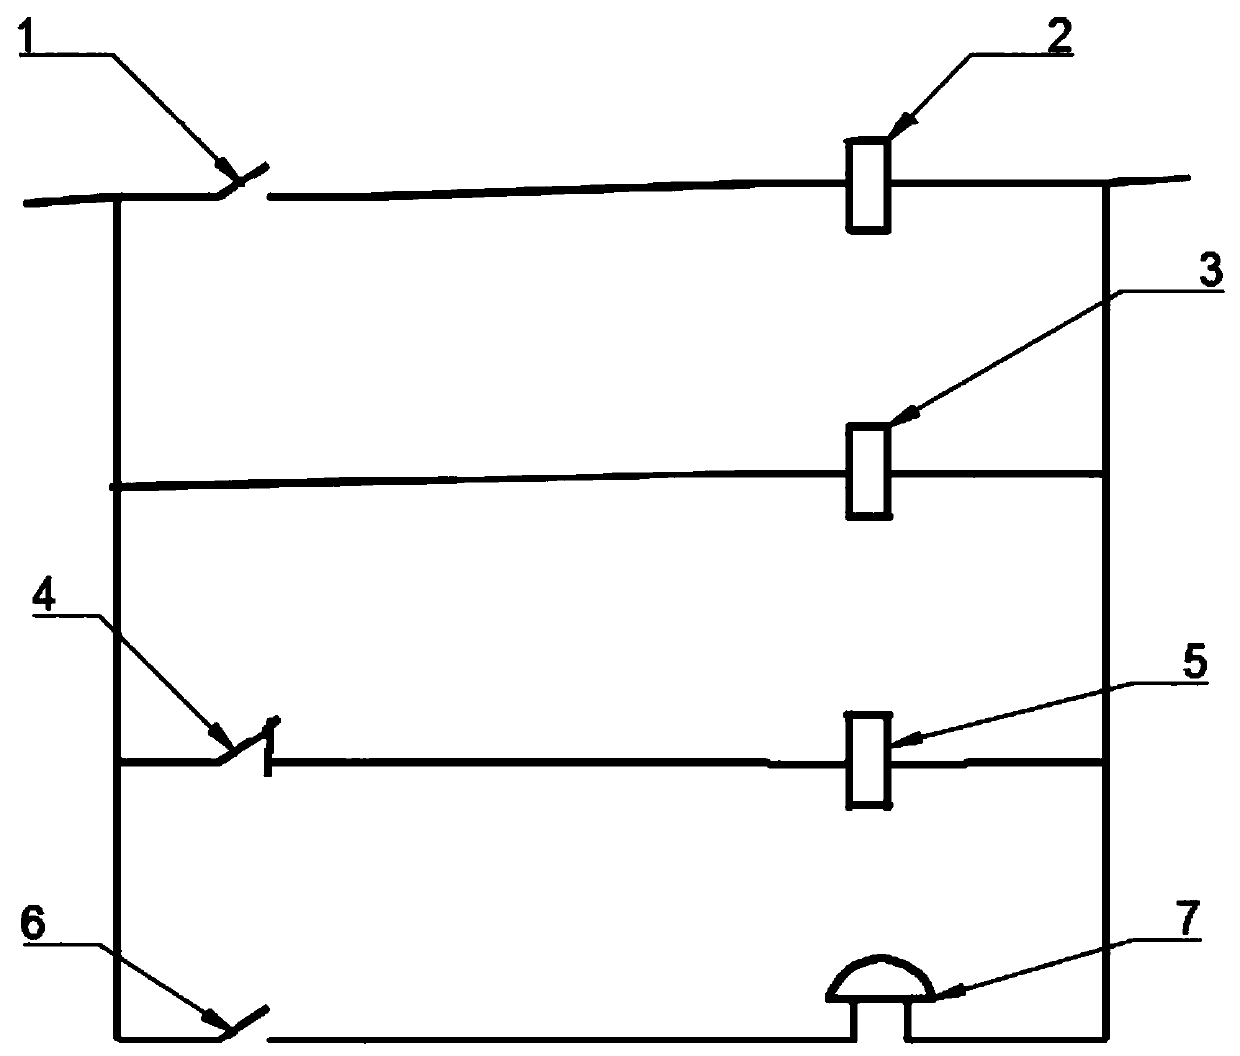 Control circuit for safety protection of filter press